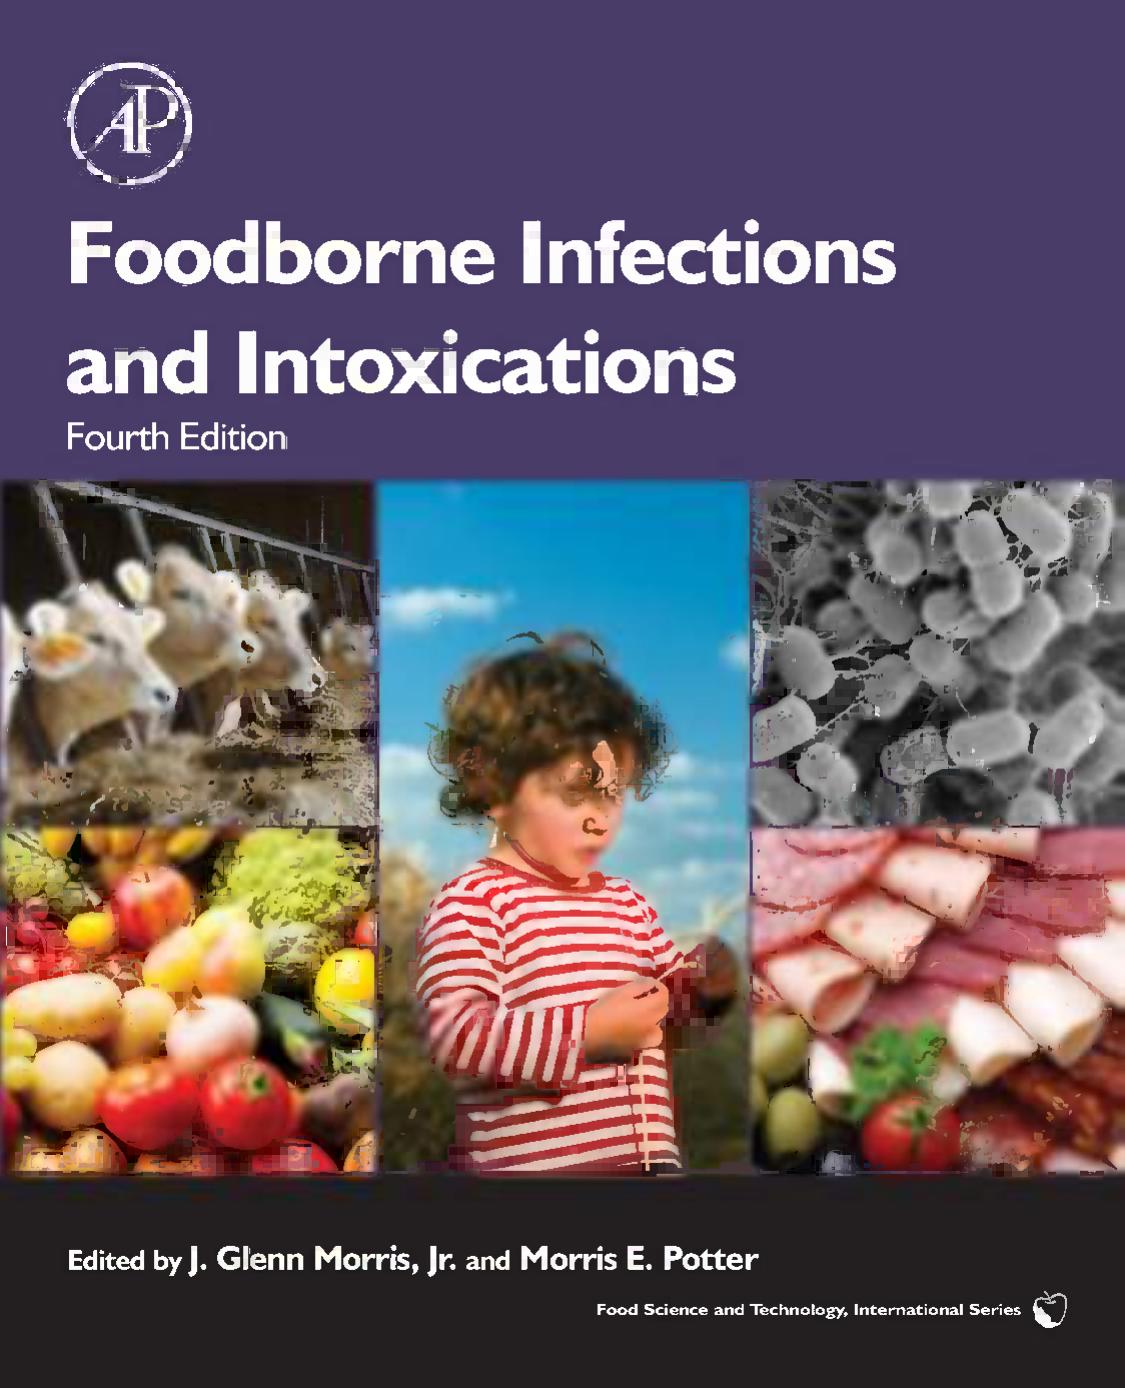 Foodborne Infections and Intoxications 4th Edition - Morris,Glen.jpg